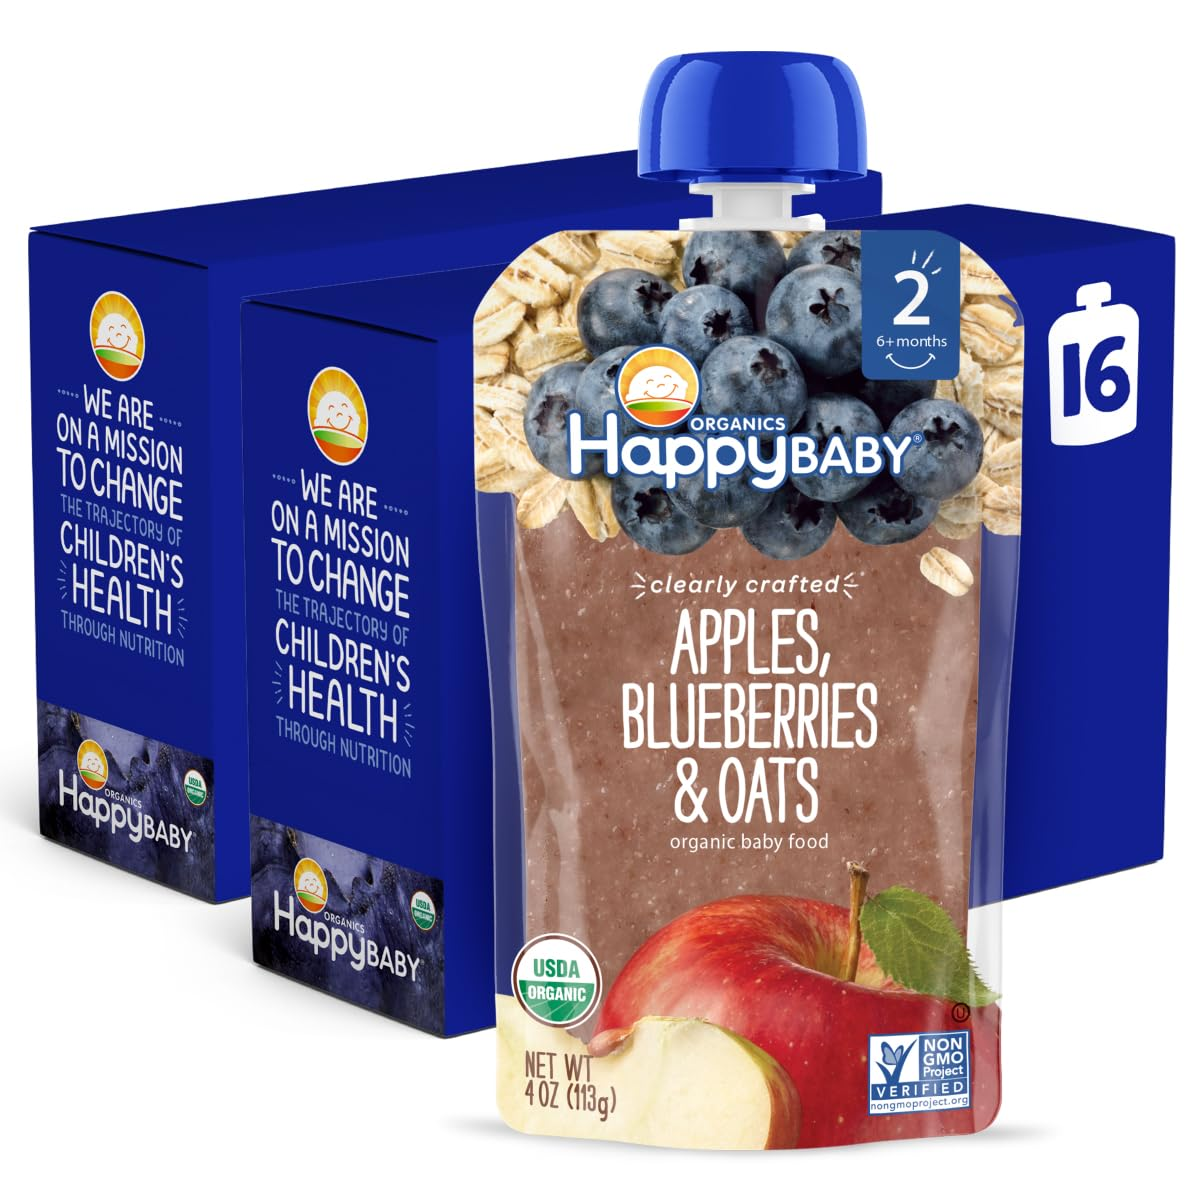 Happy Baby Organics Stage 2 Baby Food Pouches, Gluten Free, Vegan & Healthy Snack, Clearly Crafted Oat & Fruit Puree, Apples, Blueberries & Oats, 4 Ounces (Pack of 16) $18.15